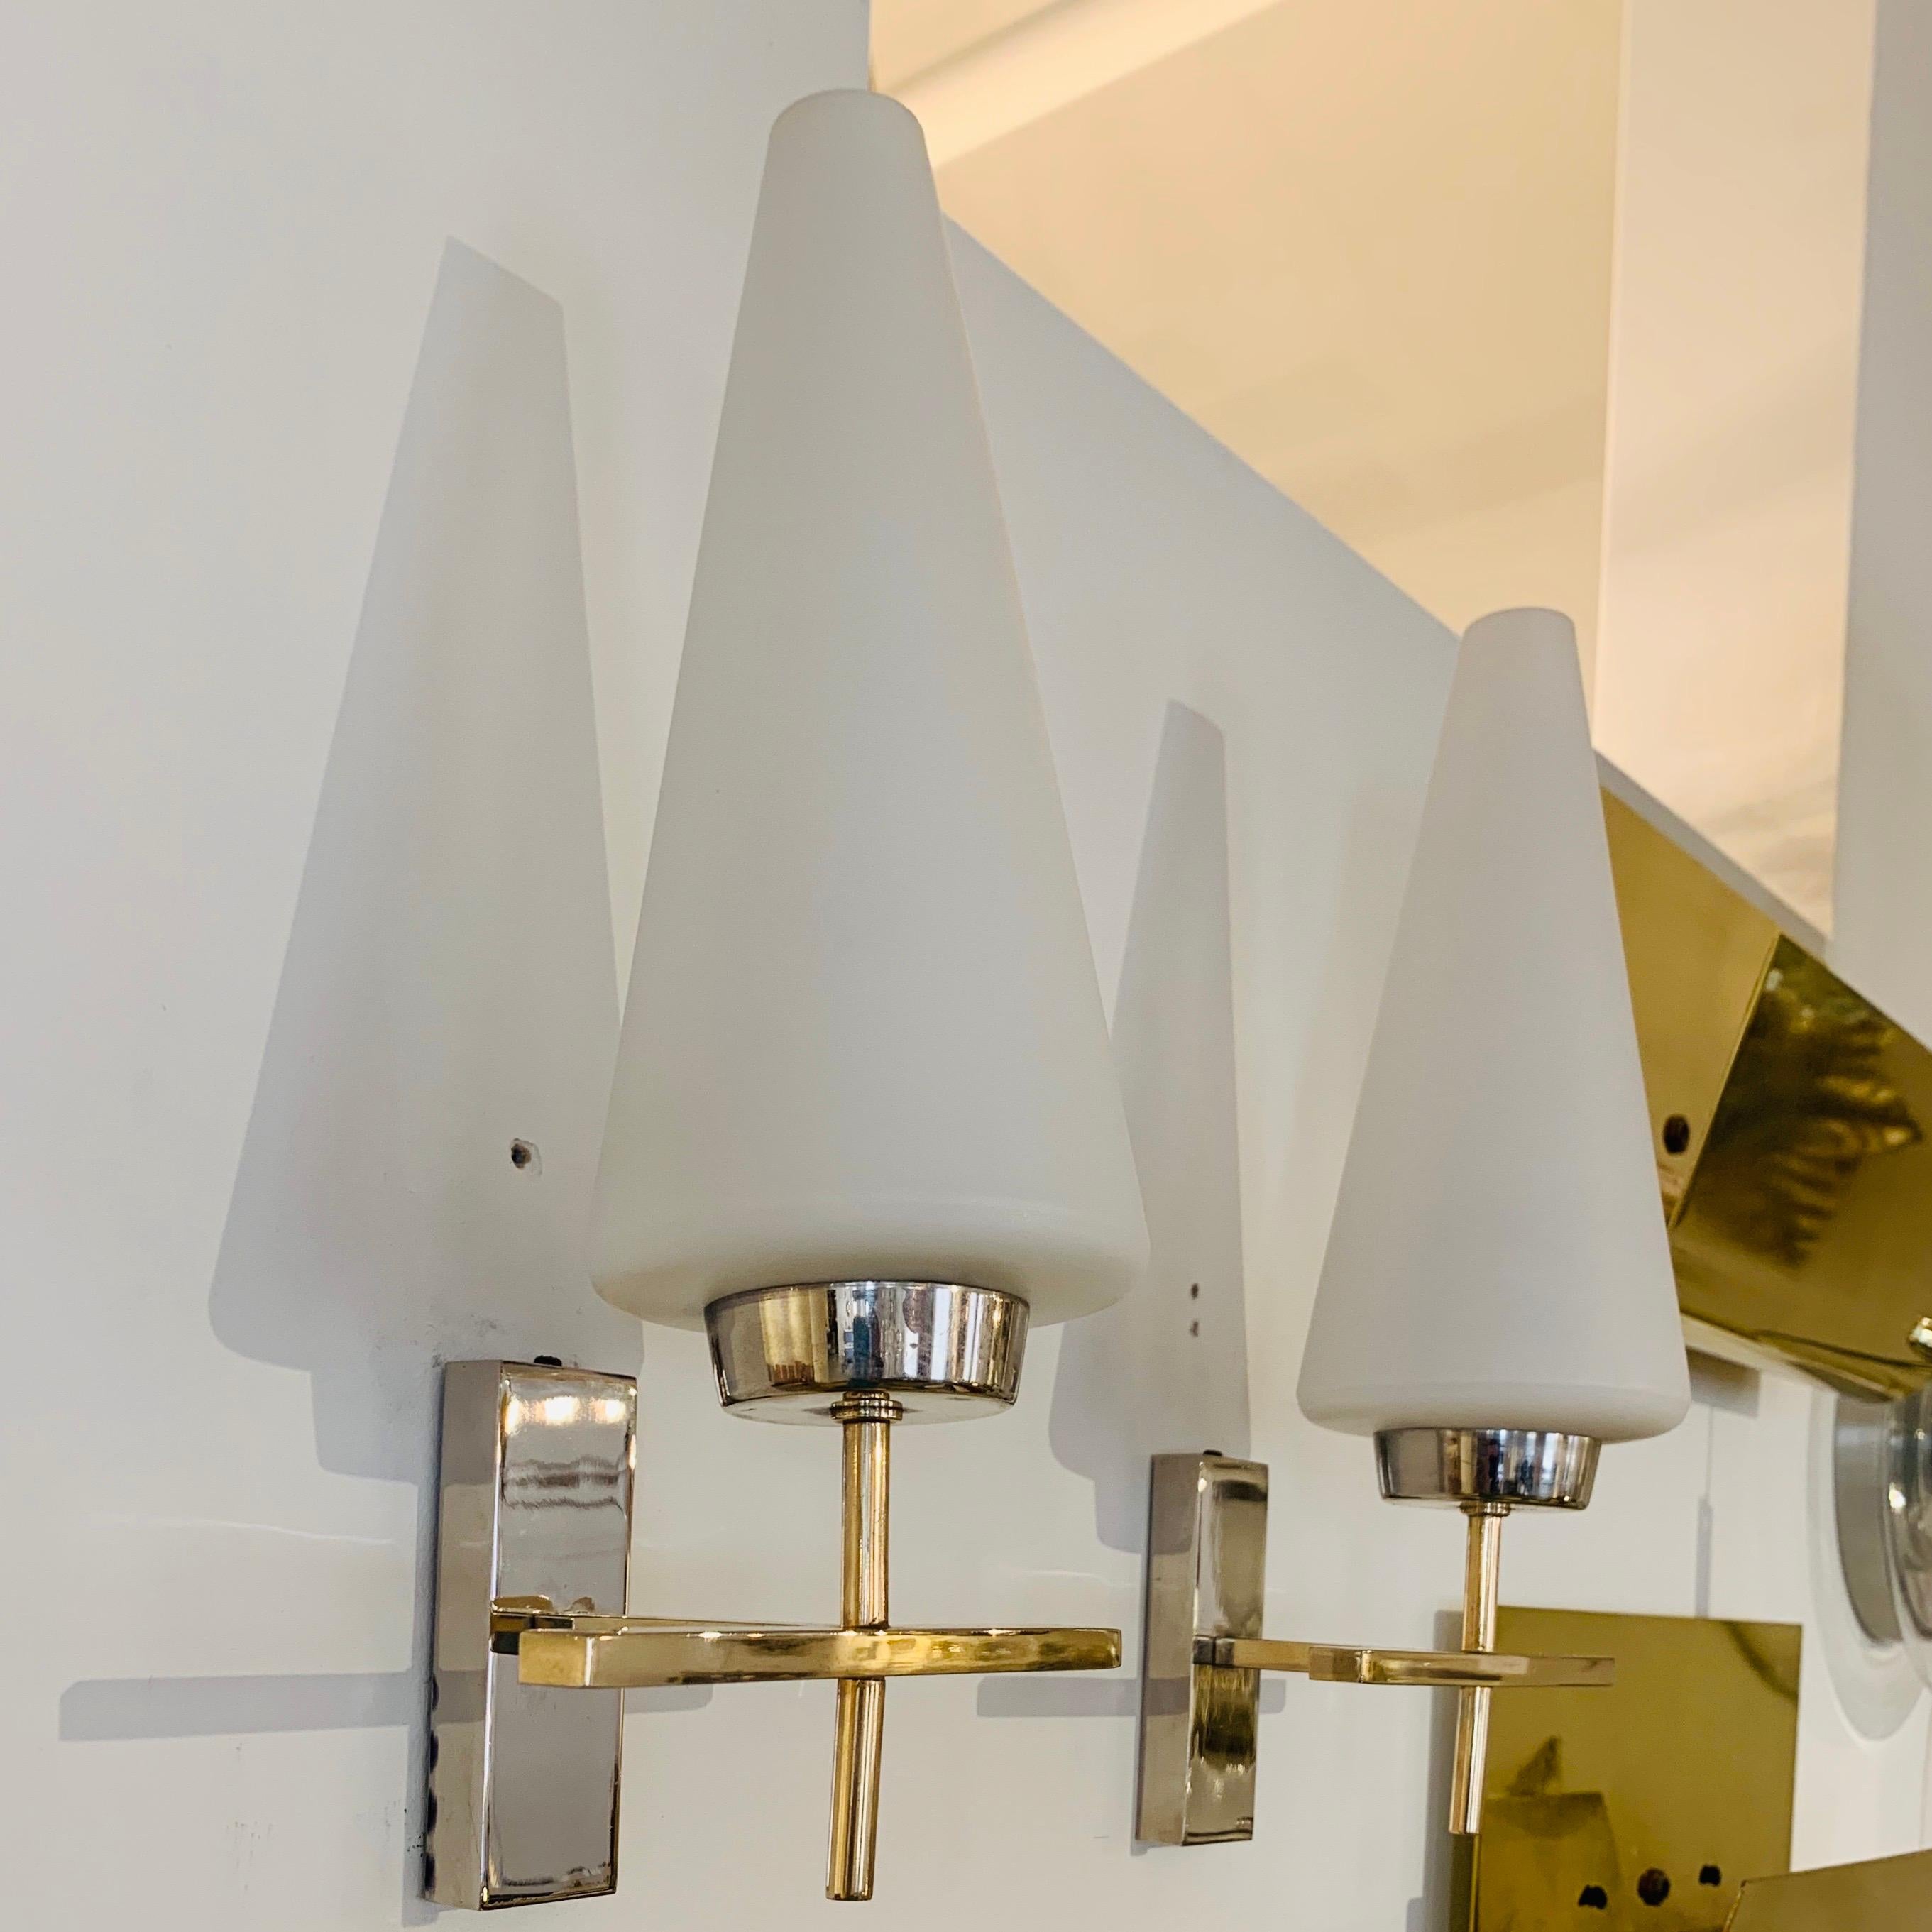 An excellent pair of 1970s French brass and polished chrome sconces with white opaline glass cone shades. Rewired. listing is for a pair, a set of two.